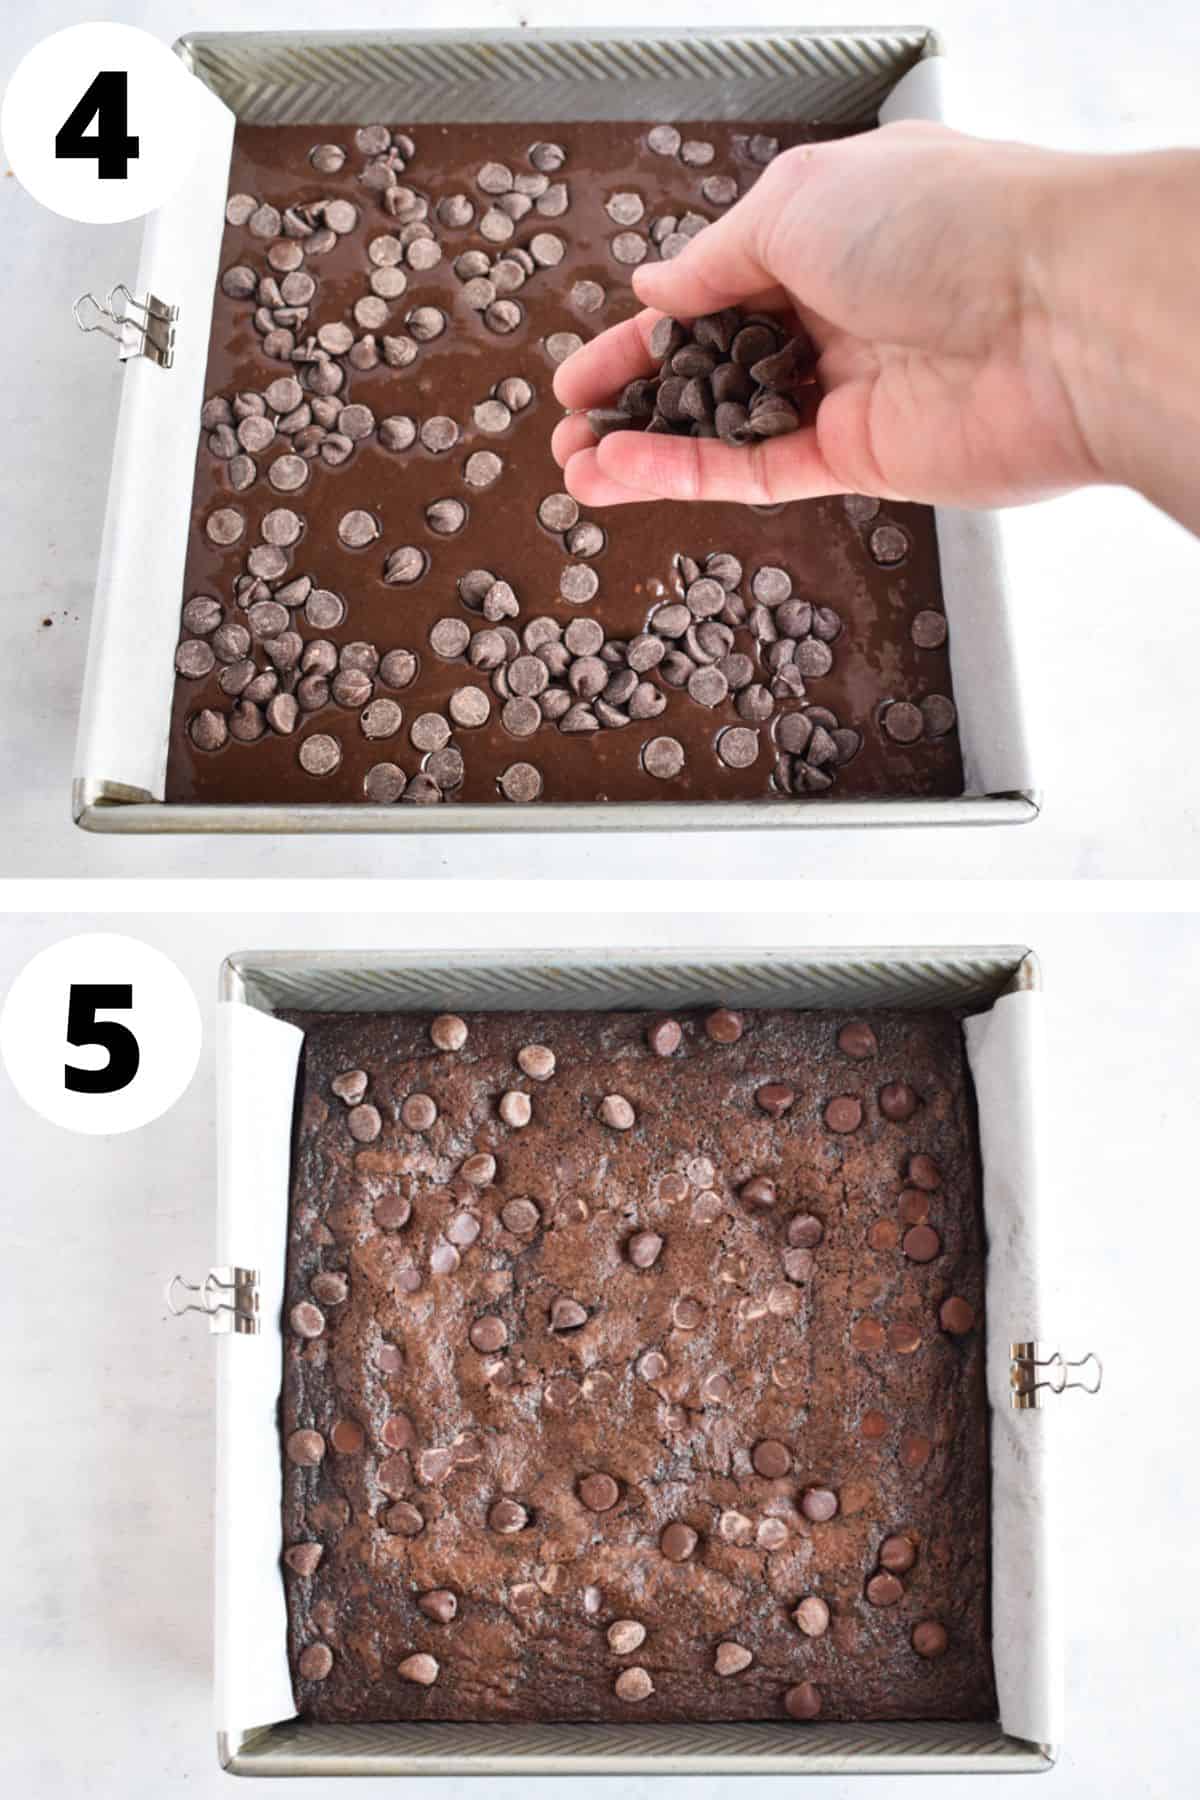 two images showing chocolate chips being added and baked brownies. 